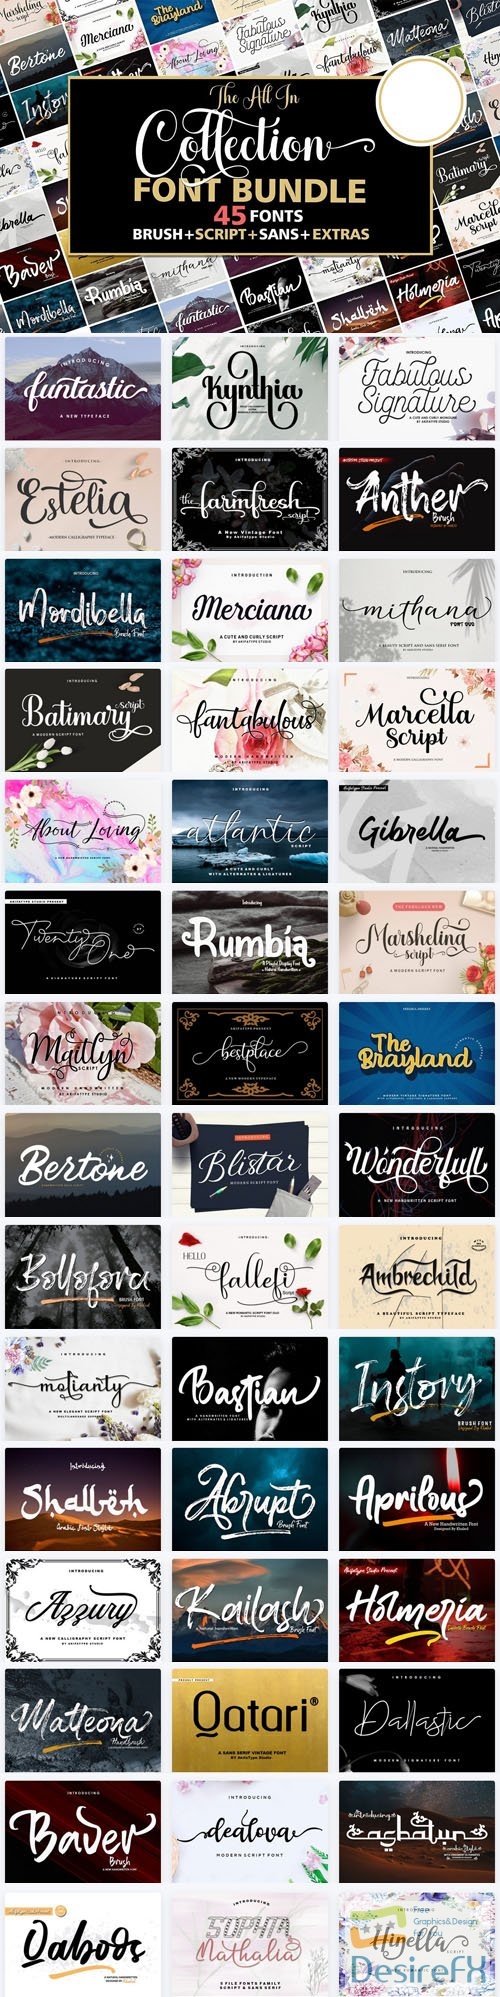 The All in Collection Font Bundle - 45 Premium Fonts Worth $551